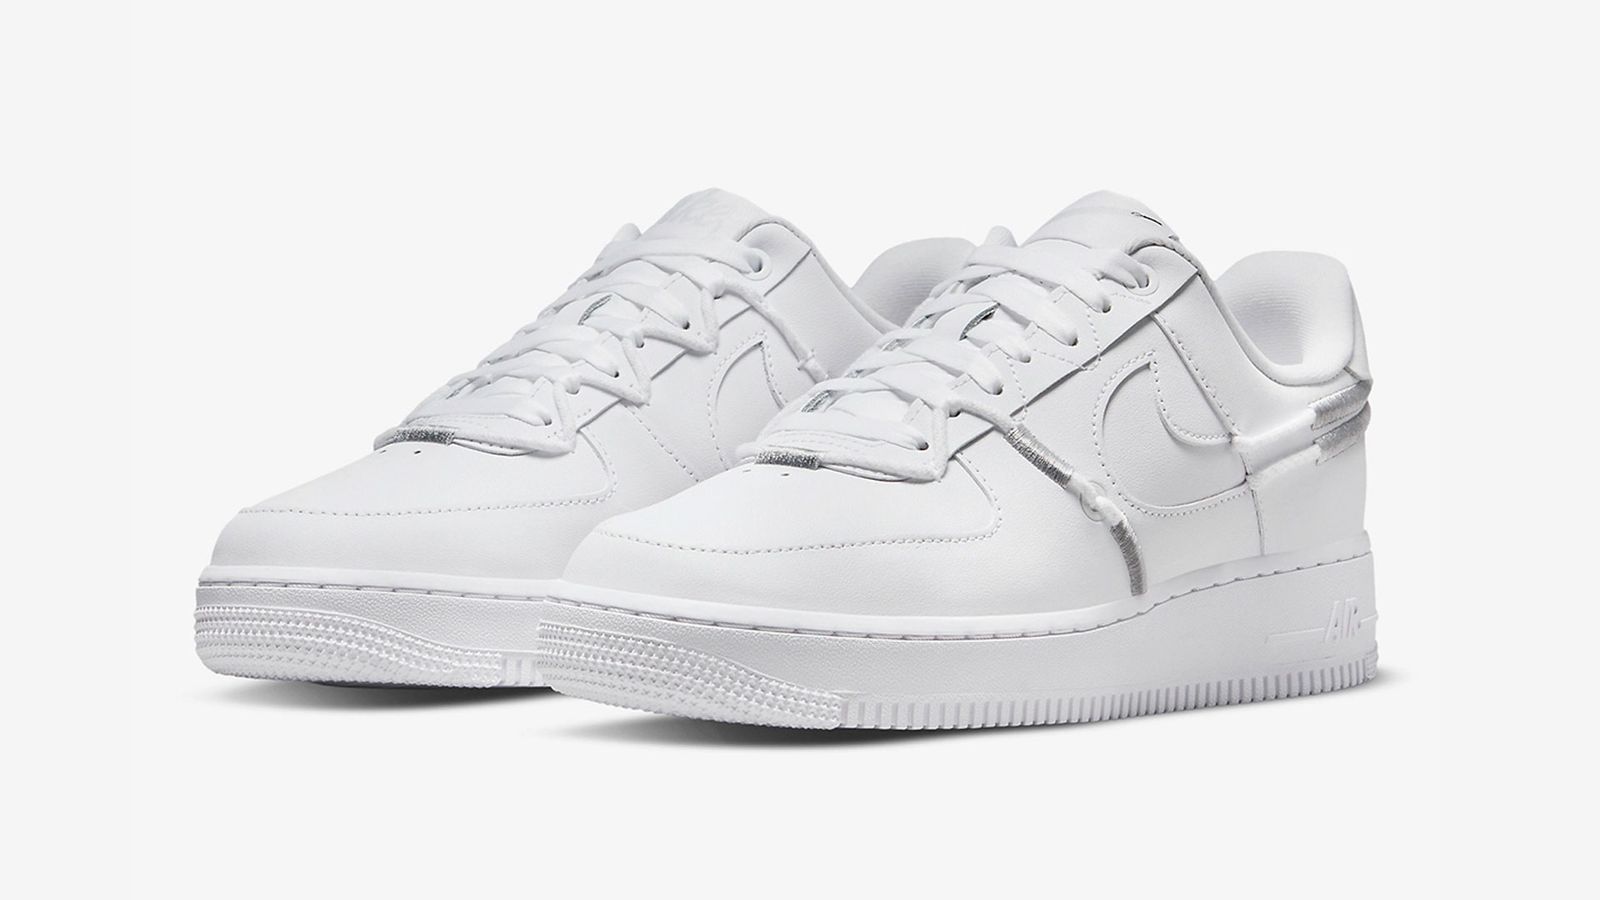 Nike Air Force 1 Low LX: Release Date, Price, And Where To Buy